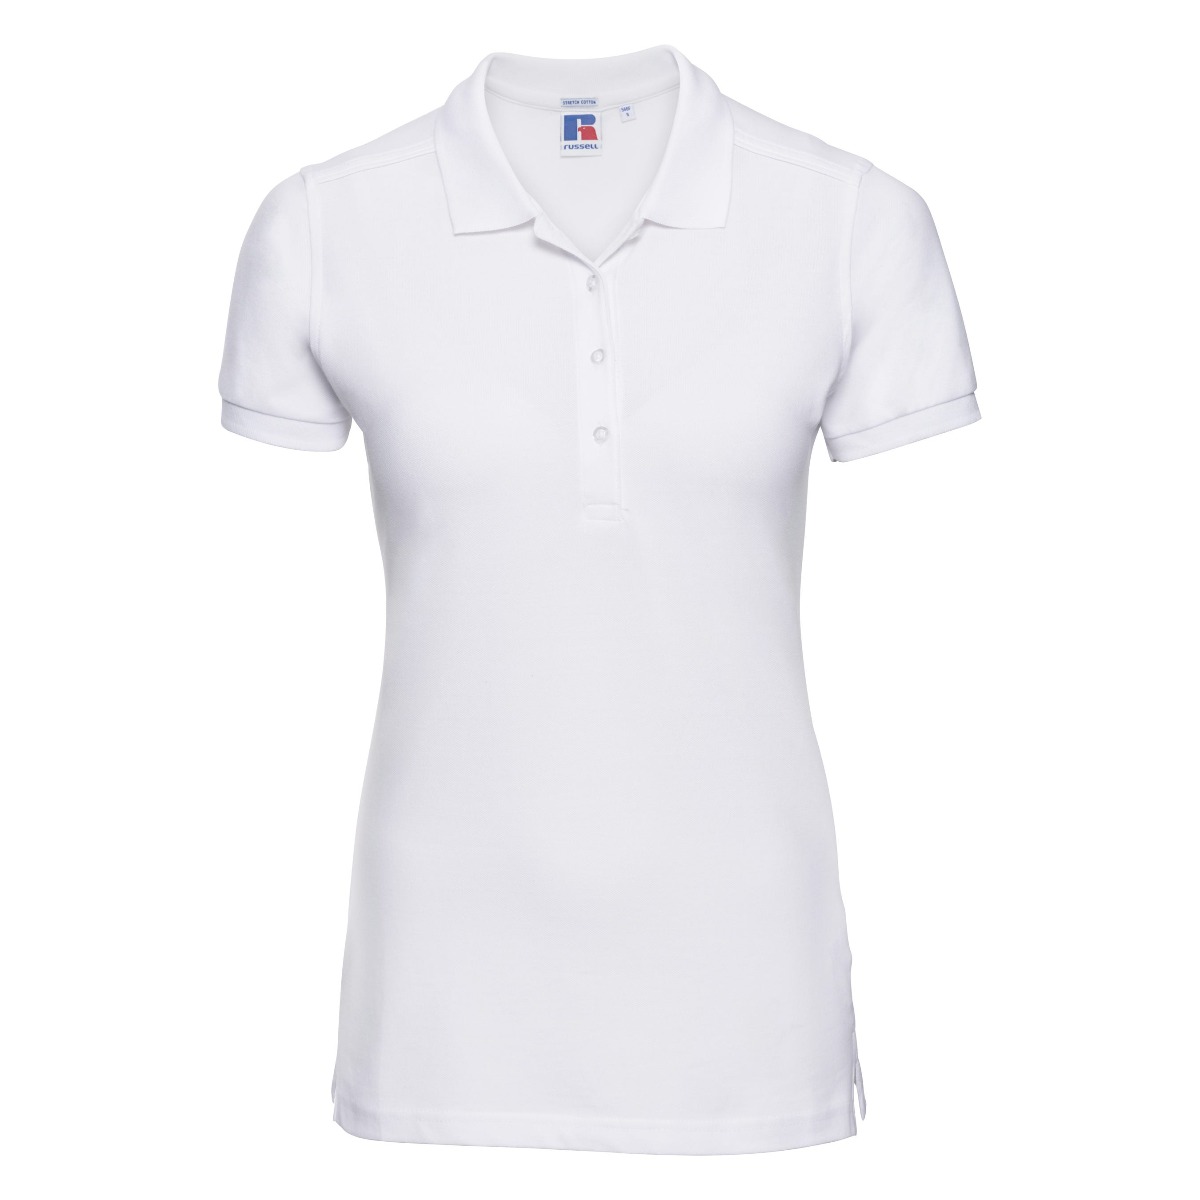 ax-httpswebsystems.s3.amazonaws.comtmp_for_downloadrussell-womens-stretch-white_1.jpg